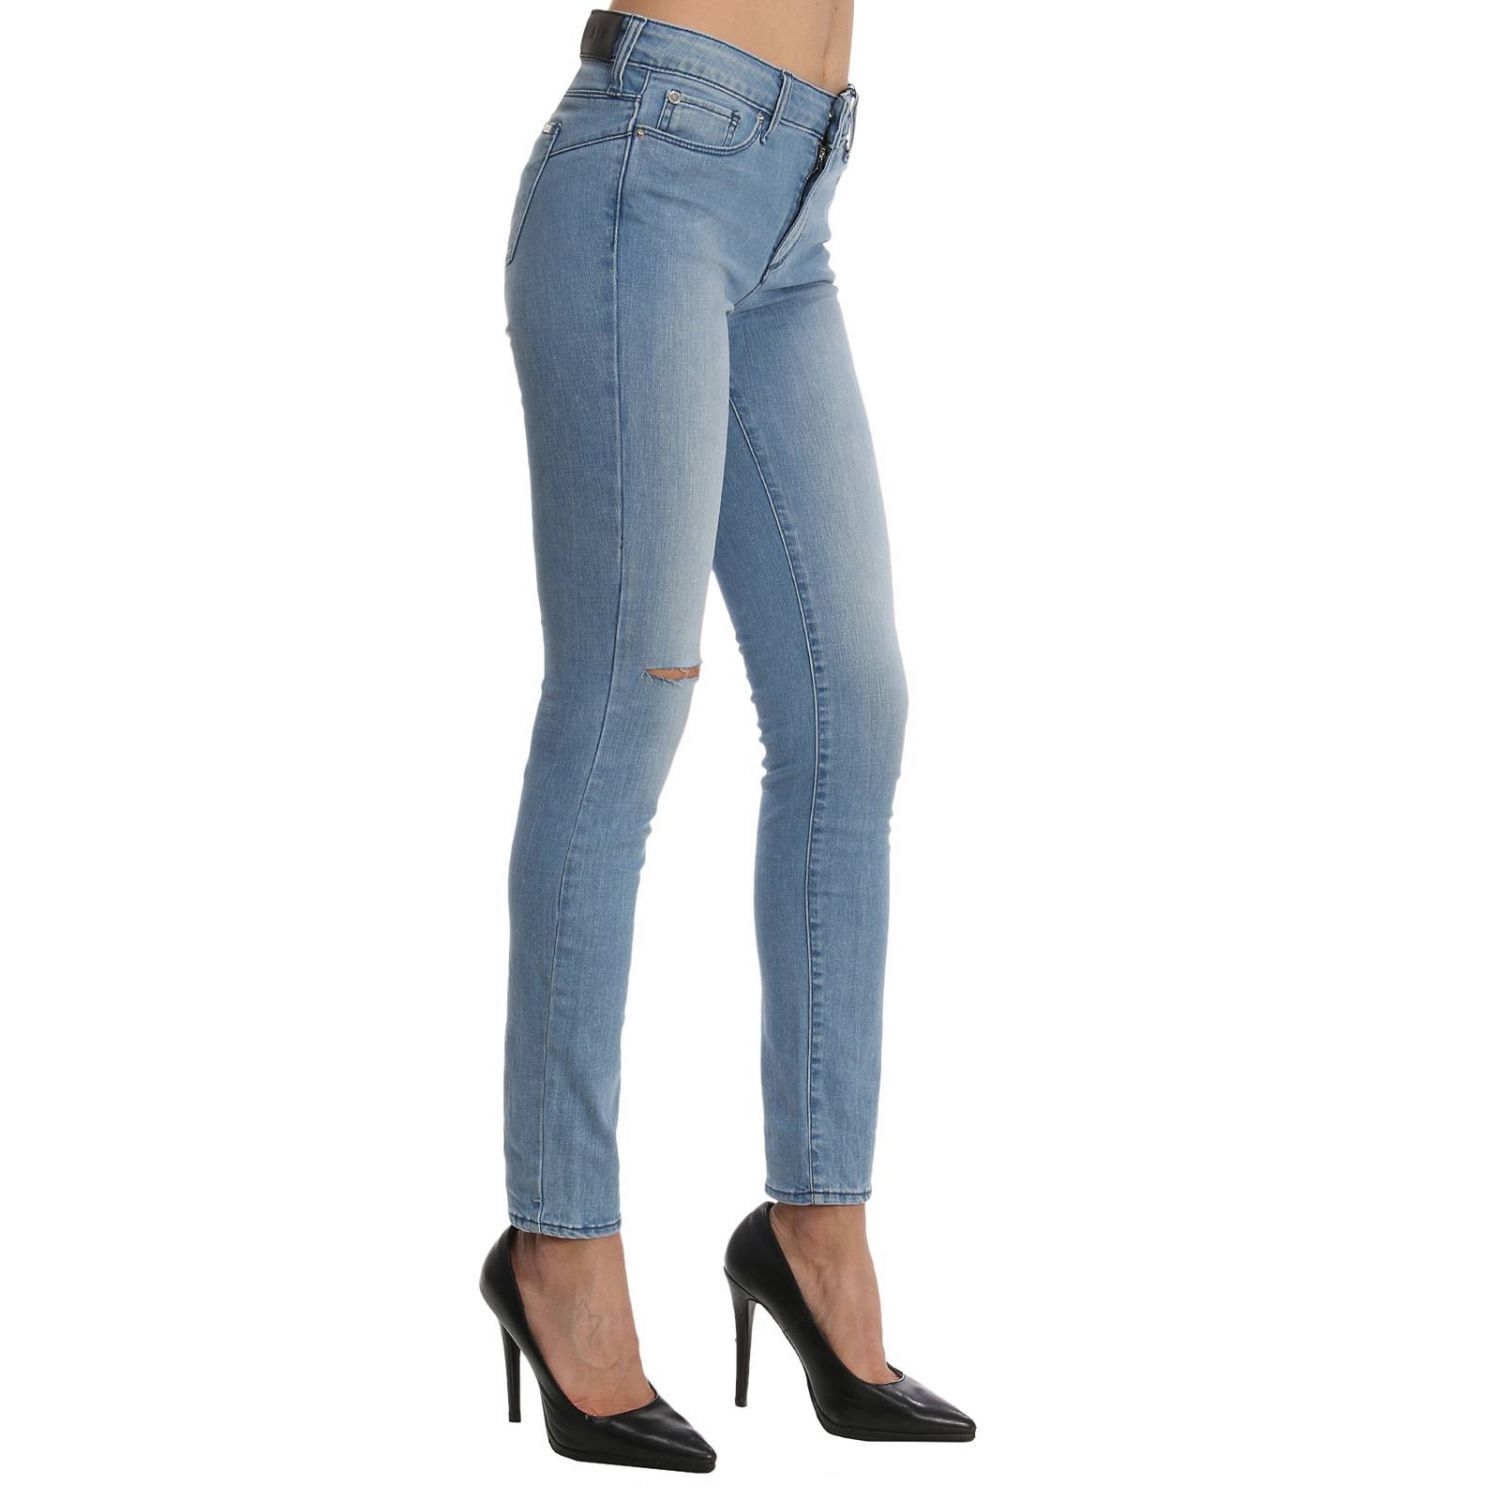 Armani Exchange Outlet: Jeans women - Stone Washed | Jeans Armani ...